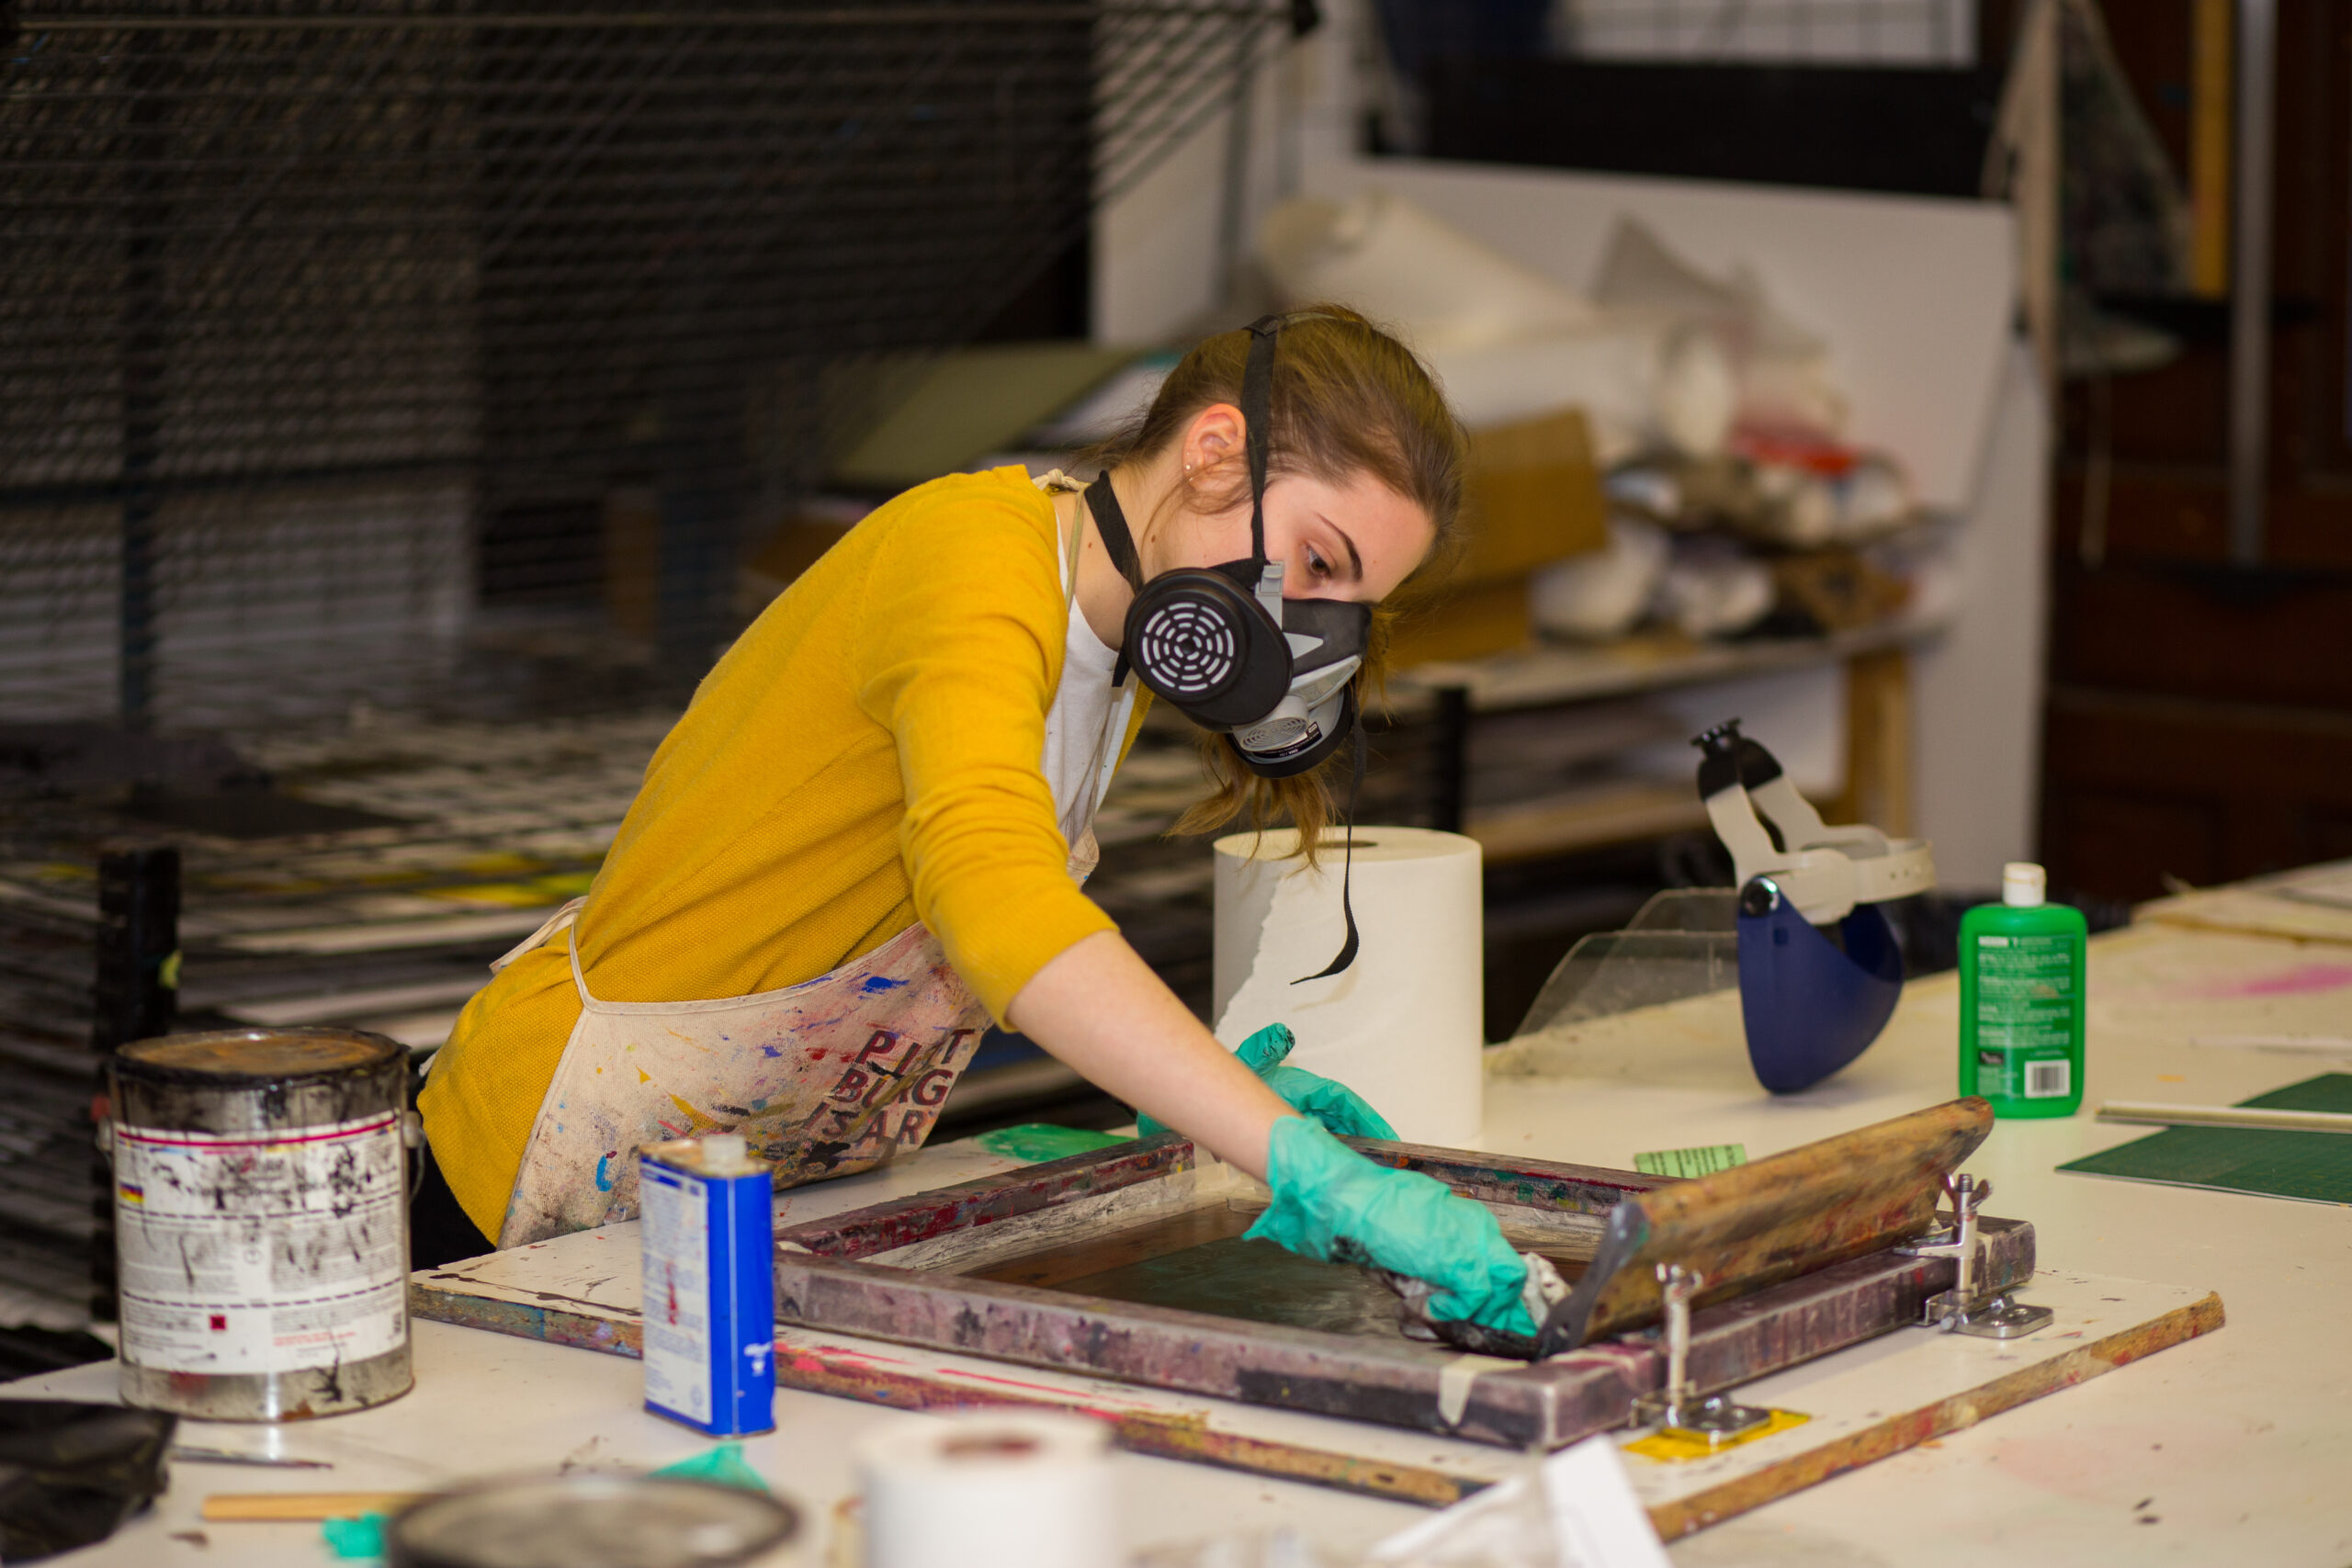 A young woman in a yellow cardigan wears green gloves and a mask as she prepares a screen for printing.